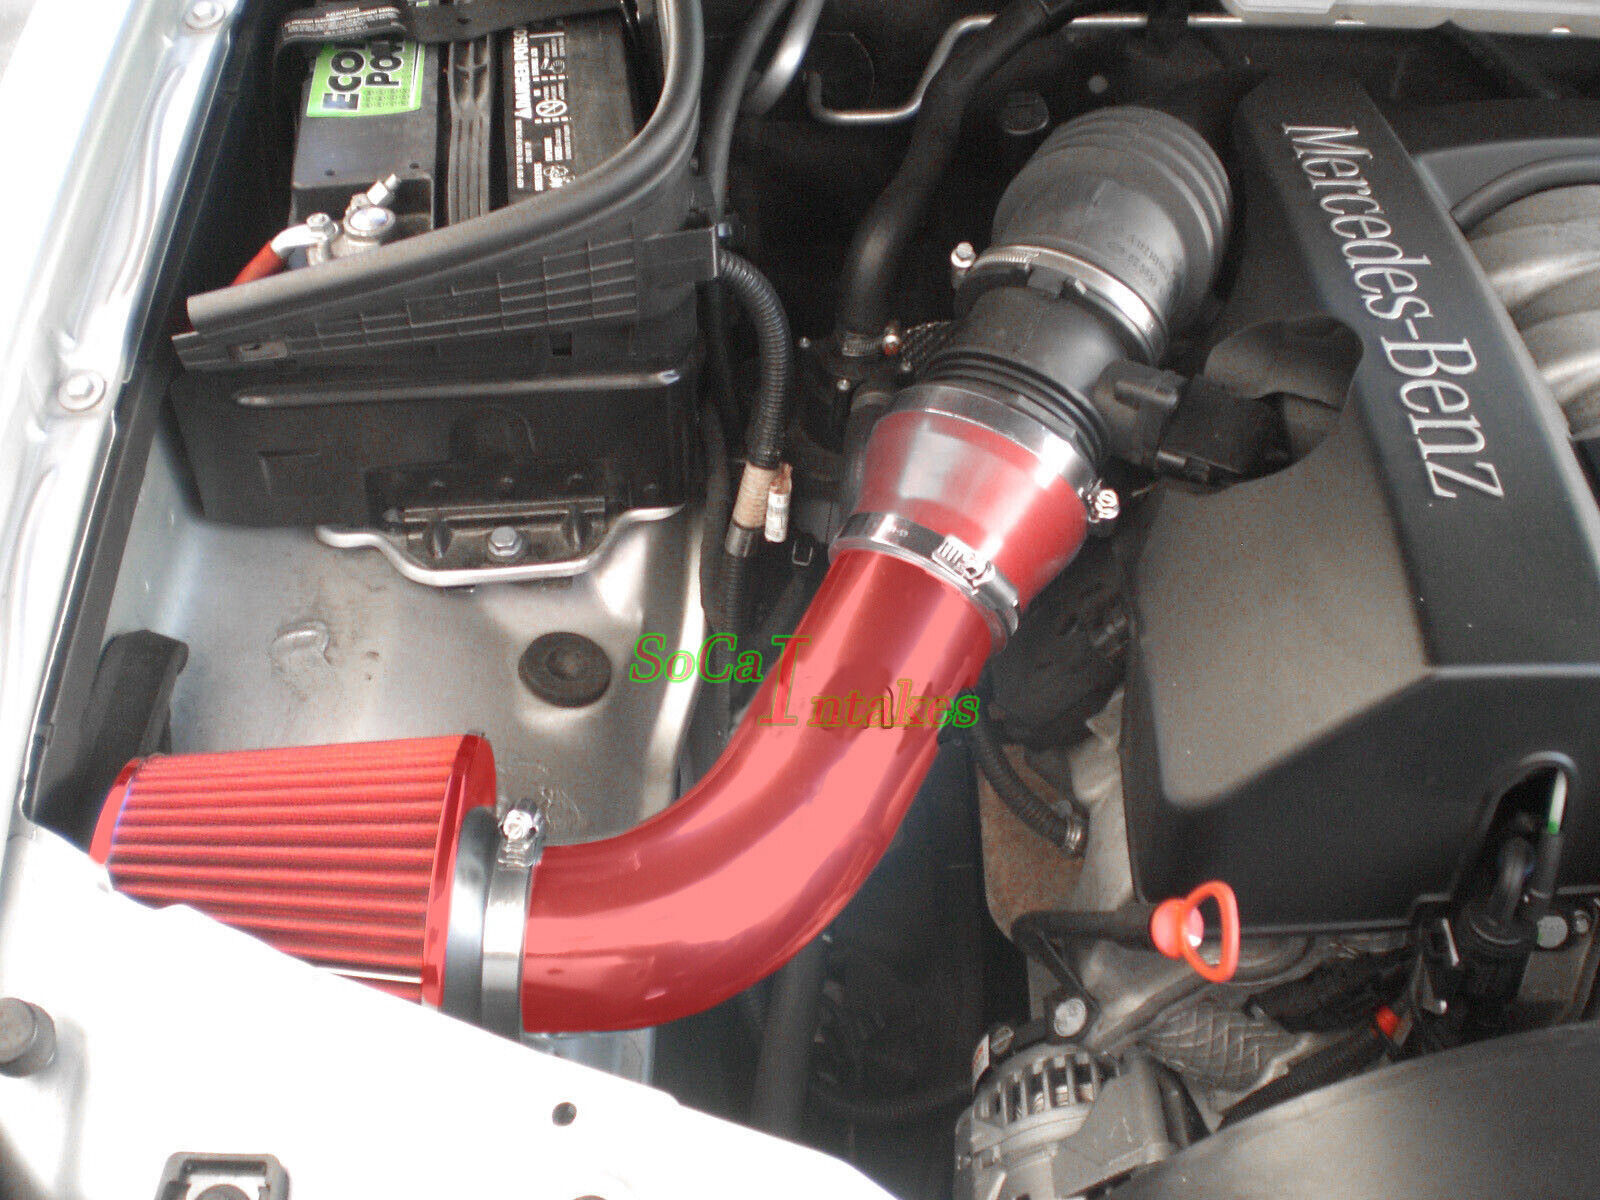 All RED Coated Air Intake Kit For 1998-2002 Mercedes E320 E430 ML320 CLK320